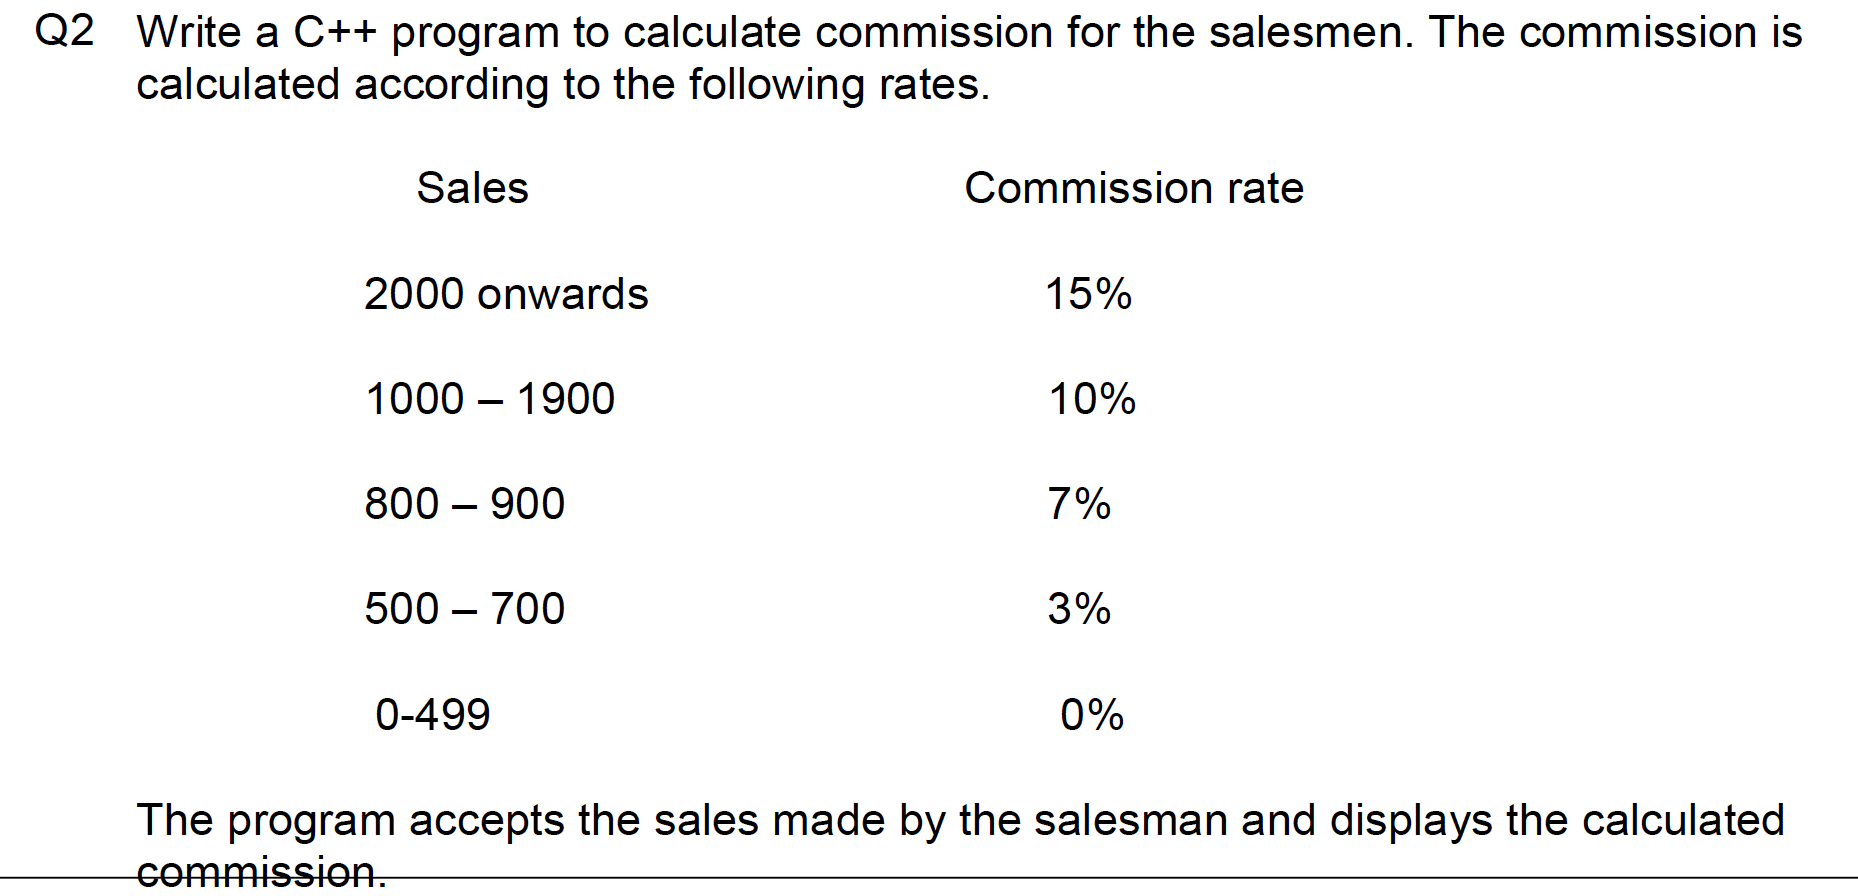 Q2 Write a C++ program to calculate commission for the salesmen. The commission is
calculated according to the following rates.
Sales
Commission rate
2000 onwards
15%
1000 – 1900
10%
800 – 900
7%
500 – 700
3%
0-499
0%
The program accepts the sales made by the salesman and displays the calculated
